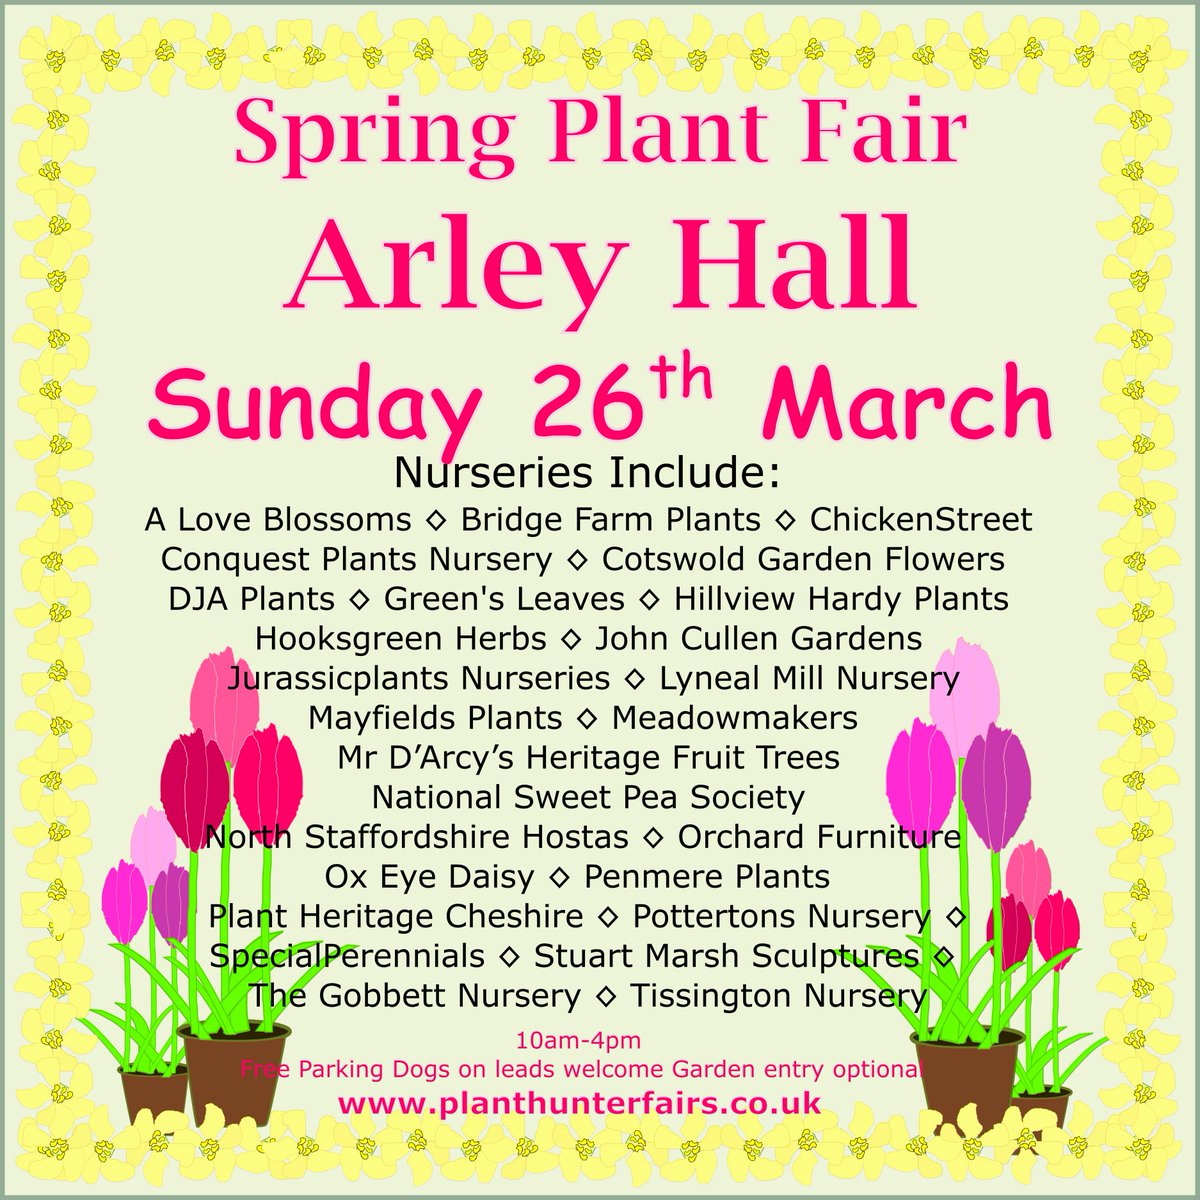 Spring Plant Fair this Sunday, 26th March, organised by @Plantfairs